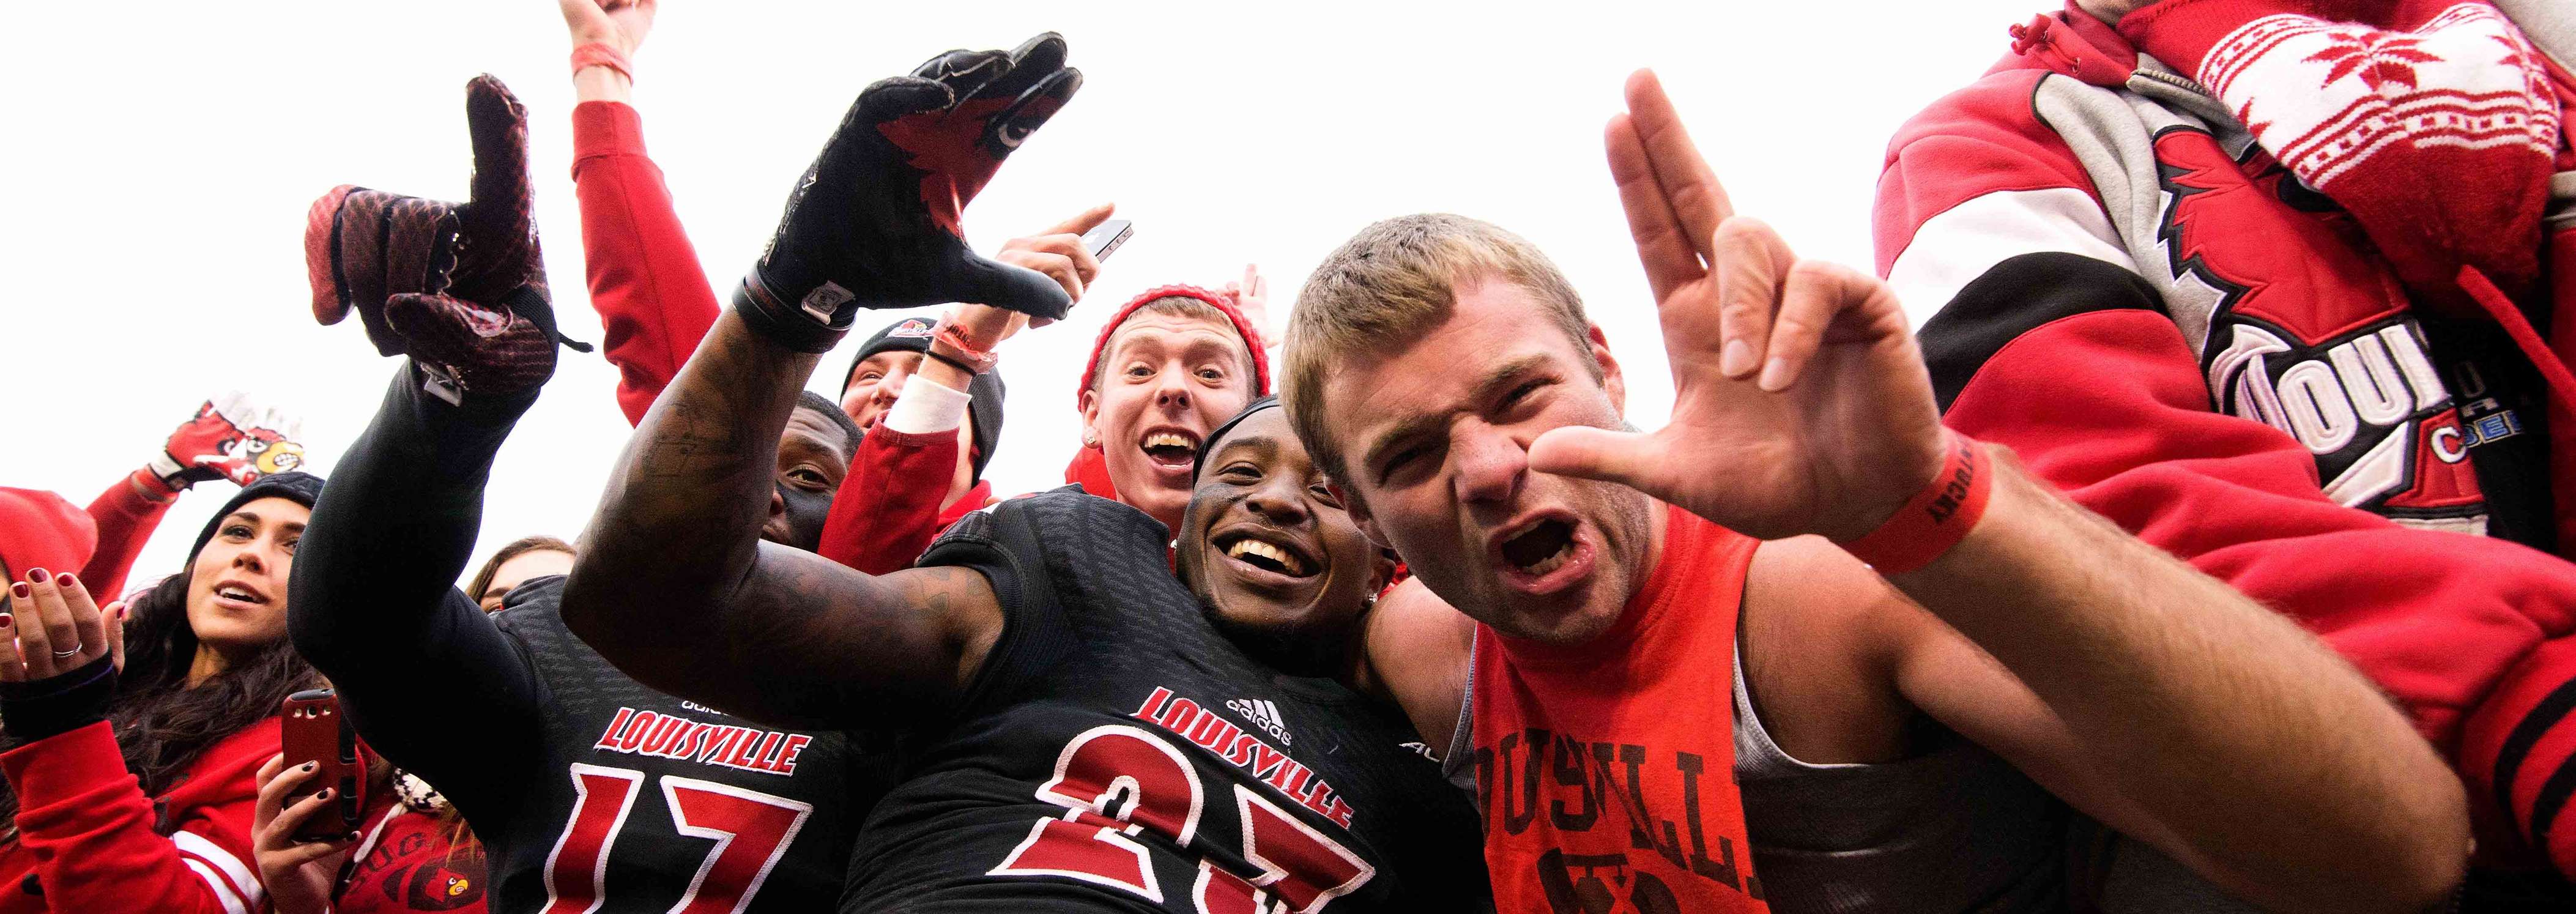 Brandon Radcliff & James Quick Celebrating 2014 Governor's Cup Photo By Adam Creech Fitted